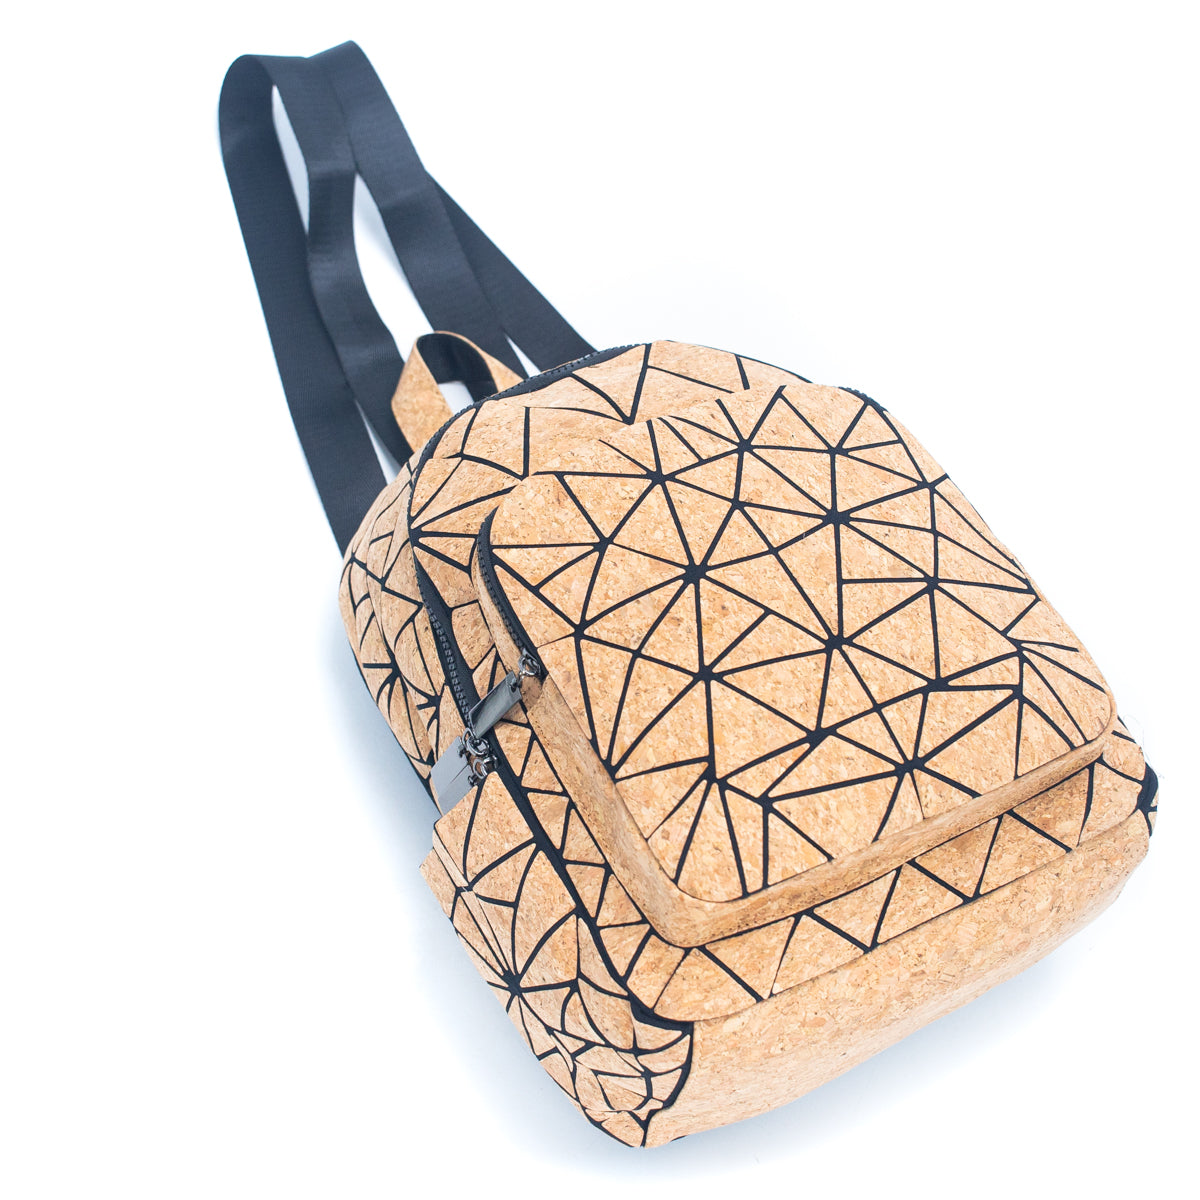 Compact Web Cork Vegan Backpack | THE CORK COLLECTION